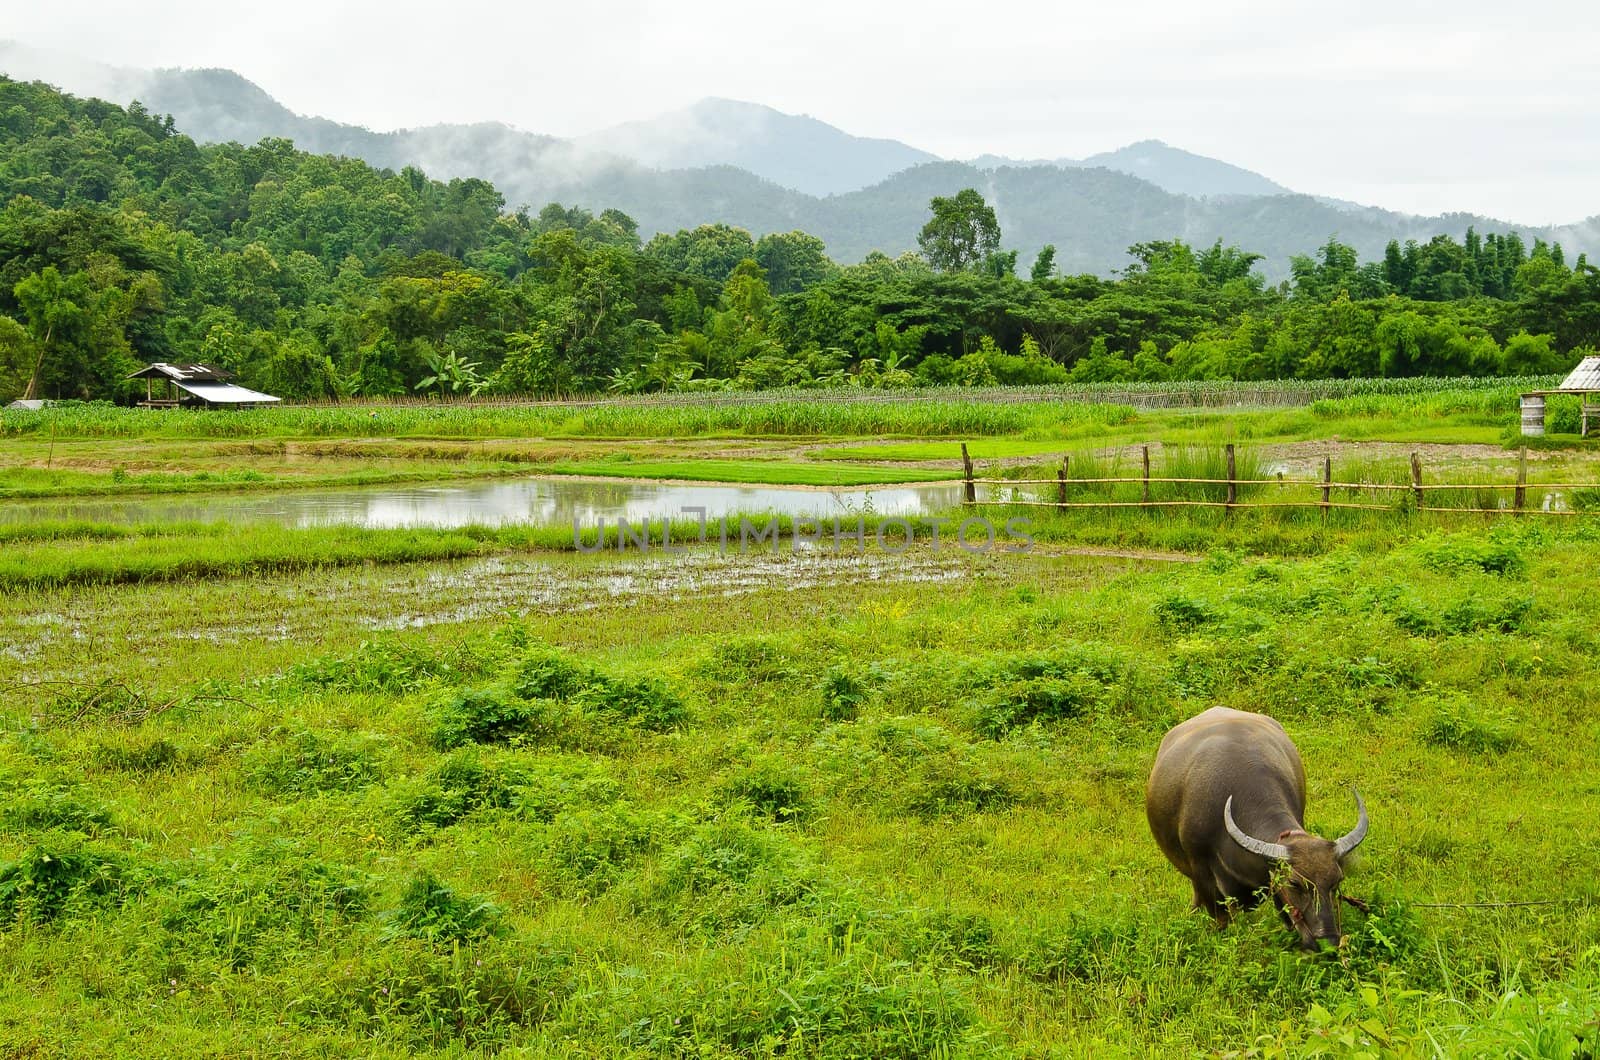 buffalo in the field in Countryside of thailand by moggara12